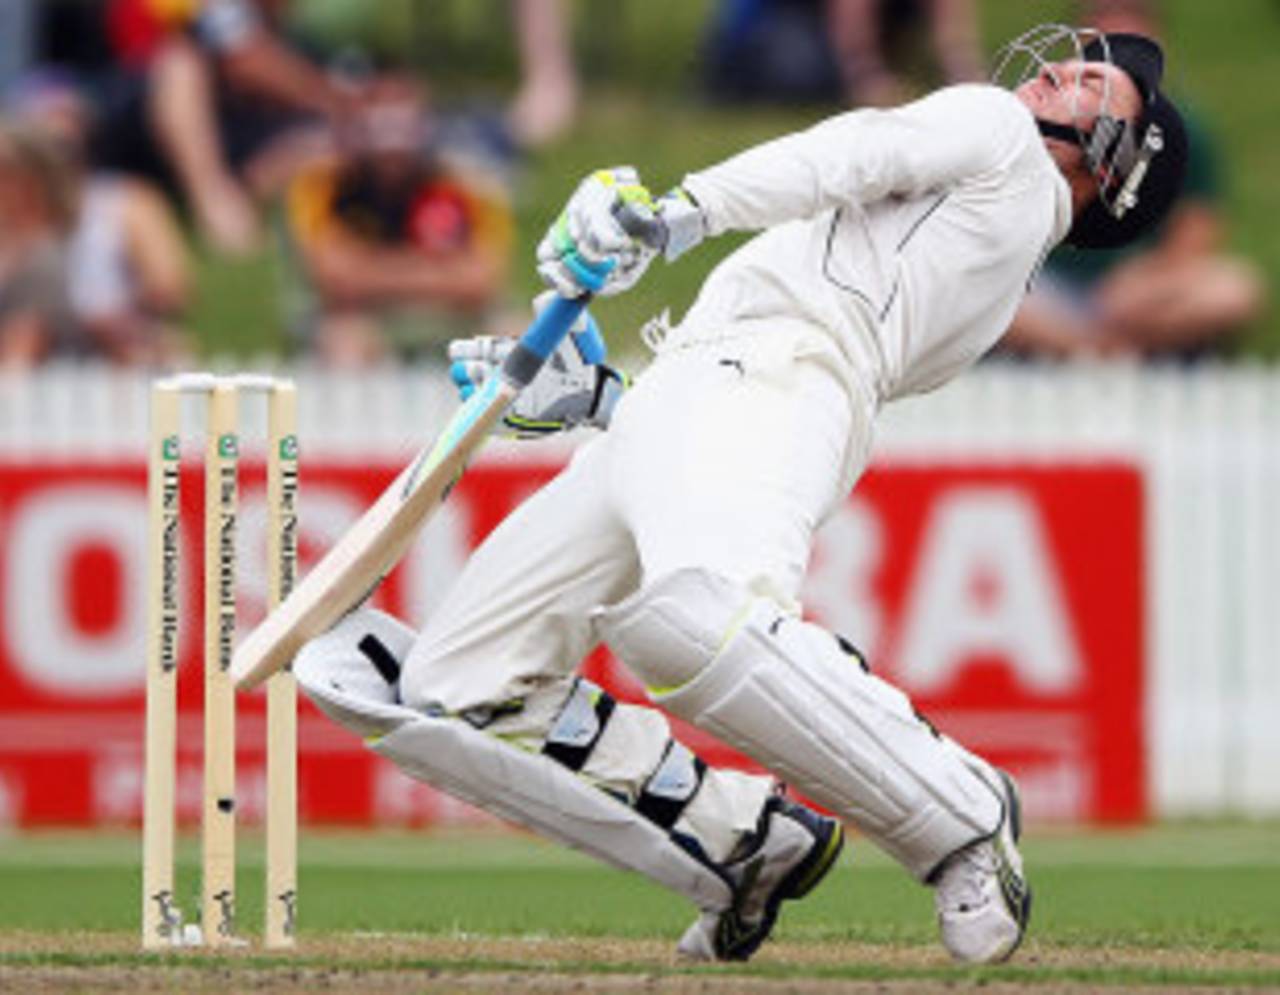 Brendon McCullum ducks to evade a bouncer, New Zealand v South Africa, 2nd Test, Hamilton, 1st day, March 15, 2012